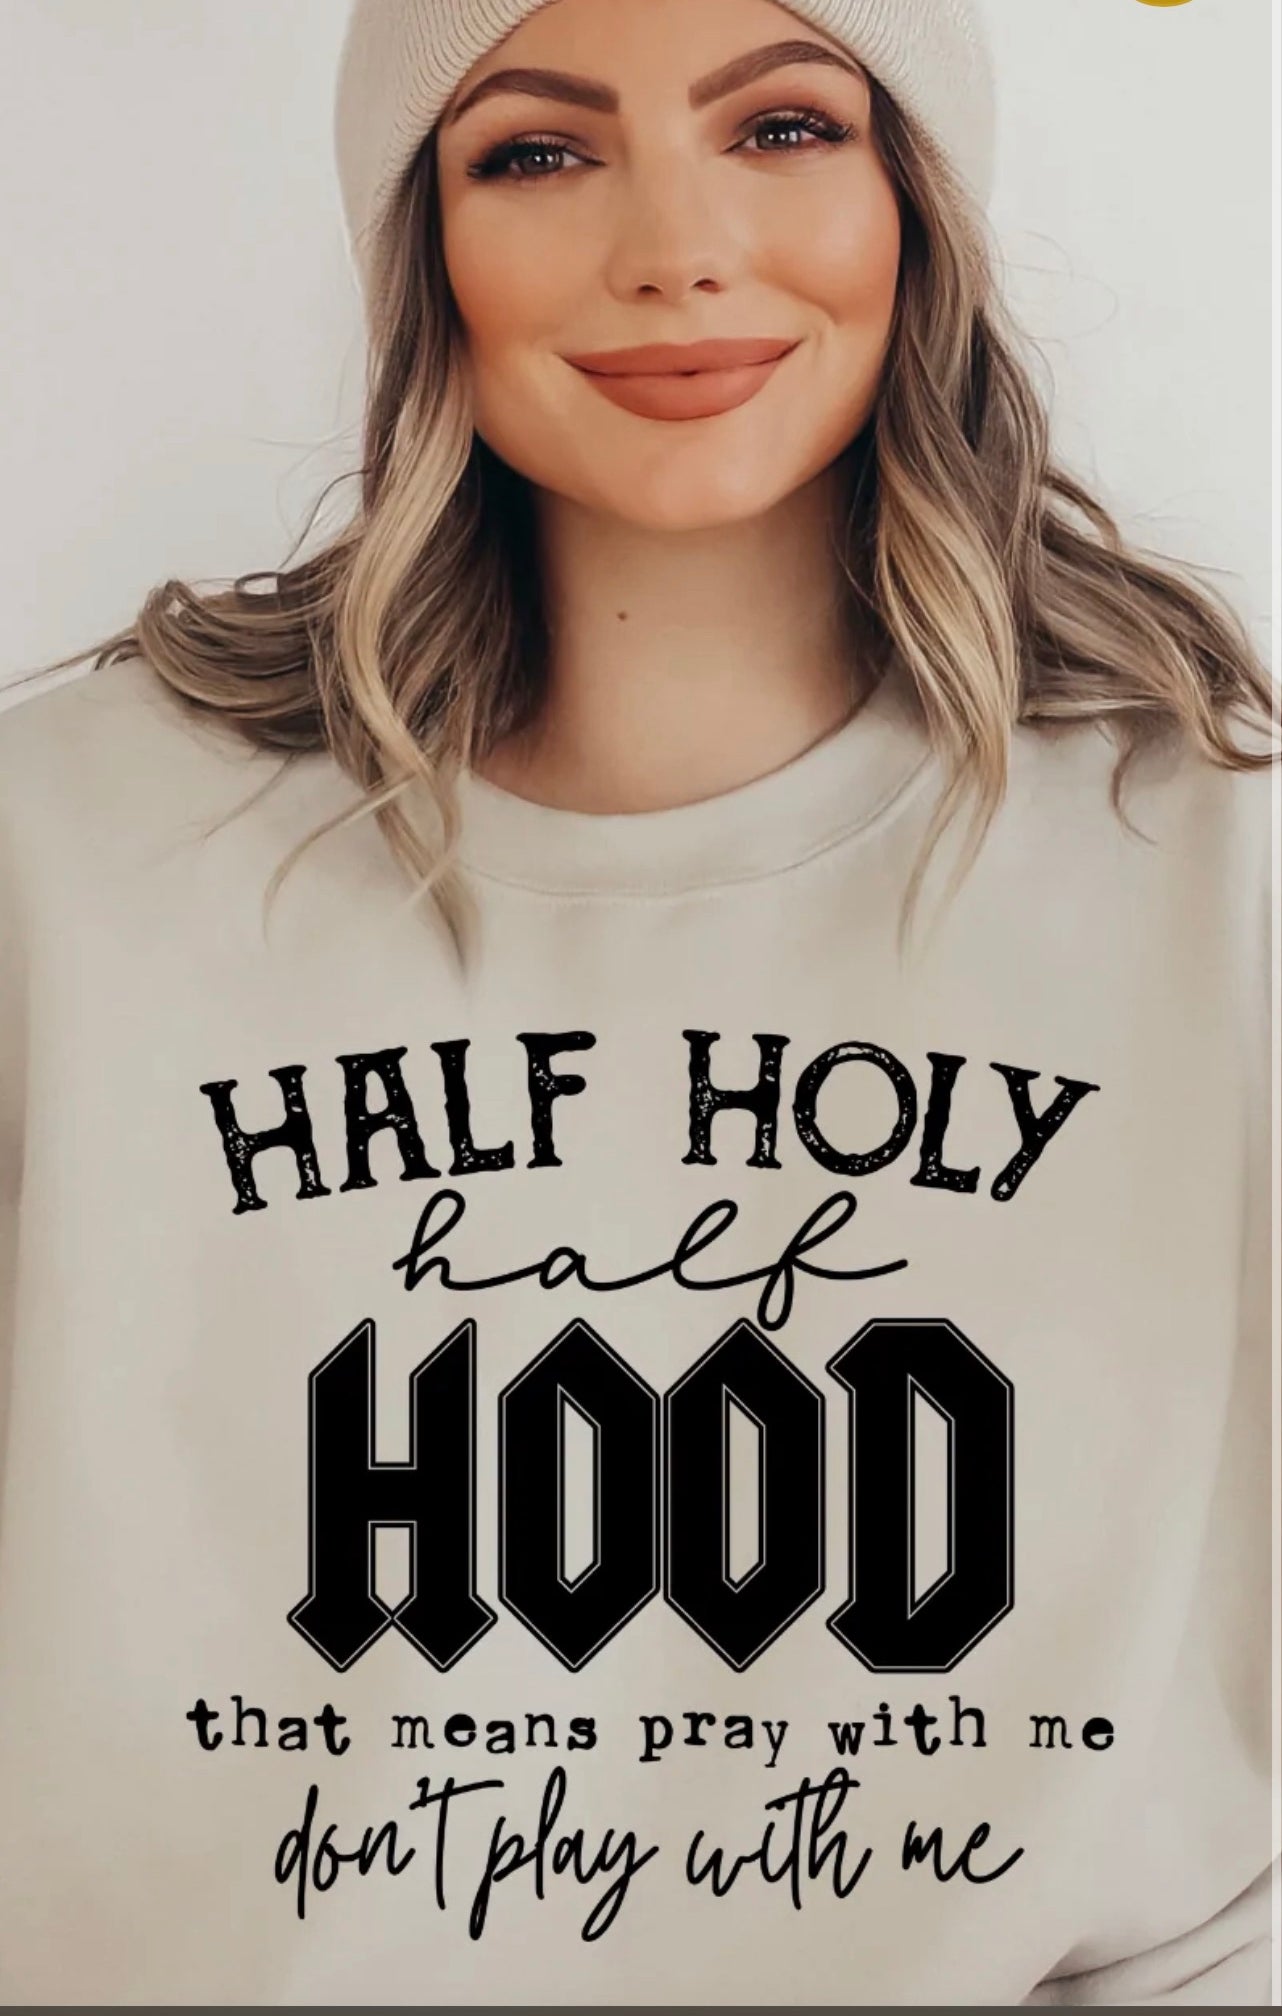 Half holy half hood, pray with me don’t play with me